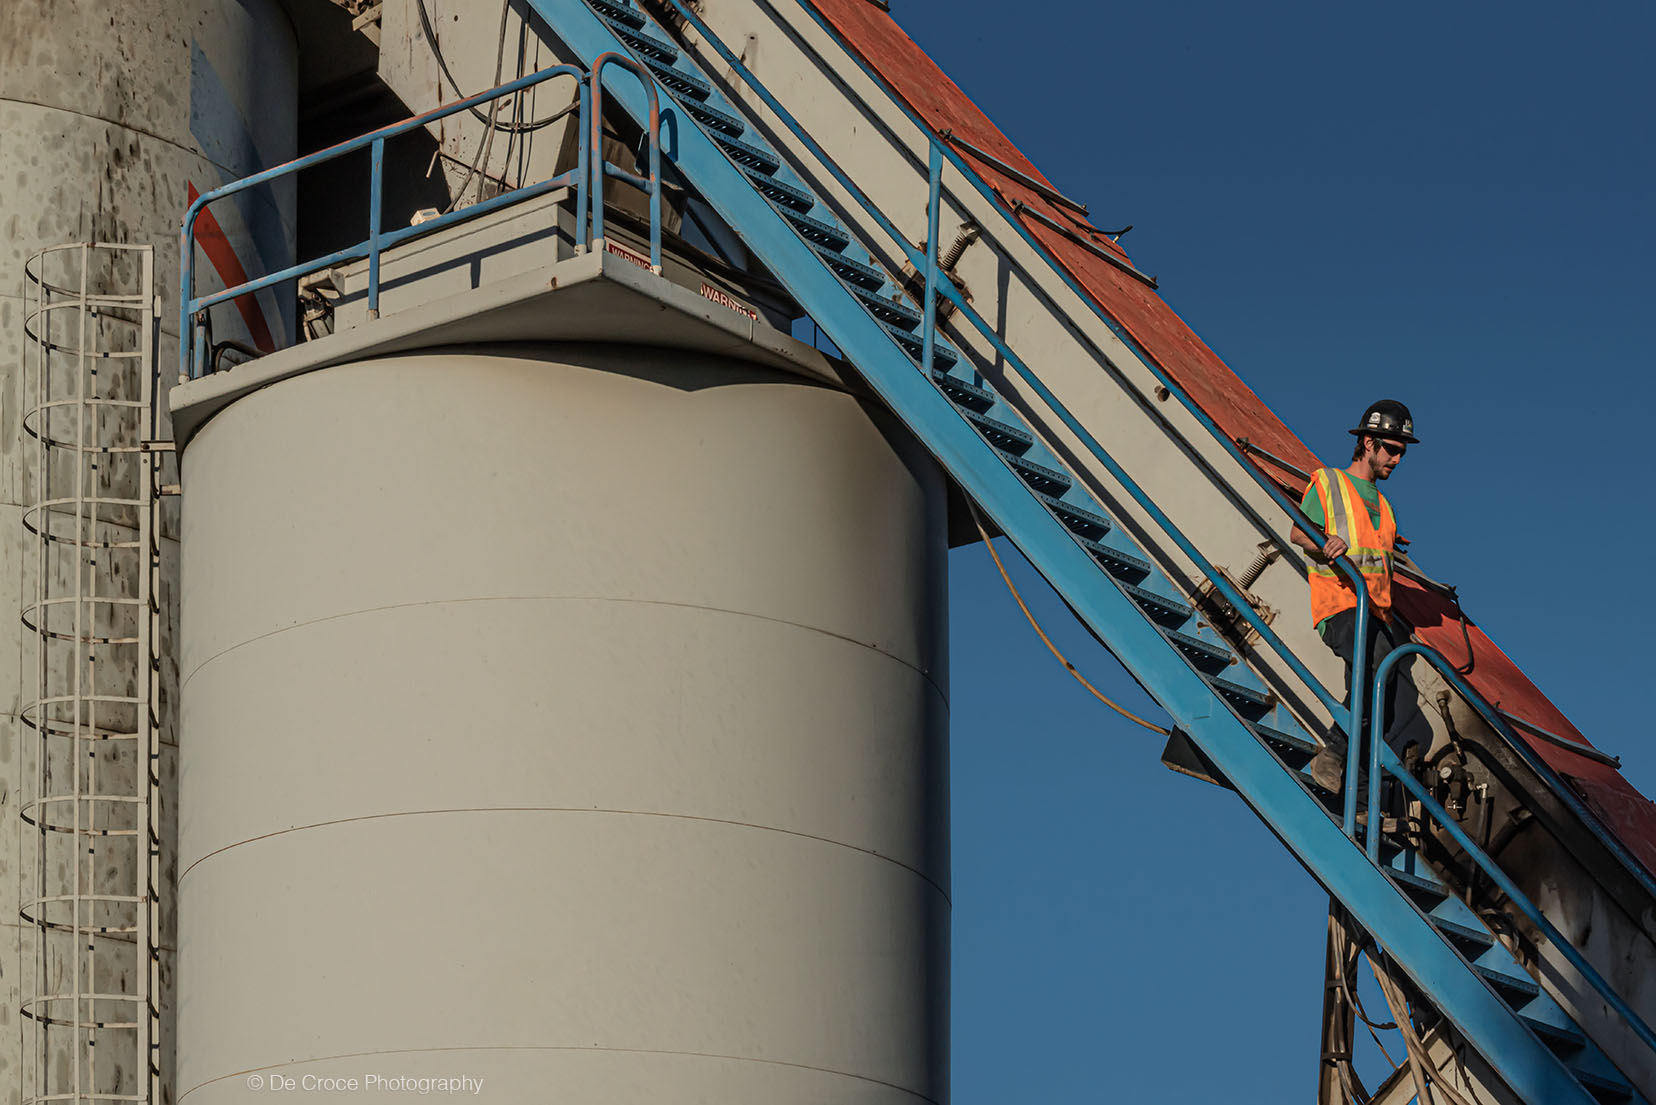 Worker steps and silo commercial industrial photography.